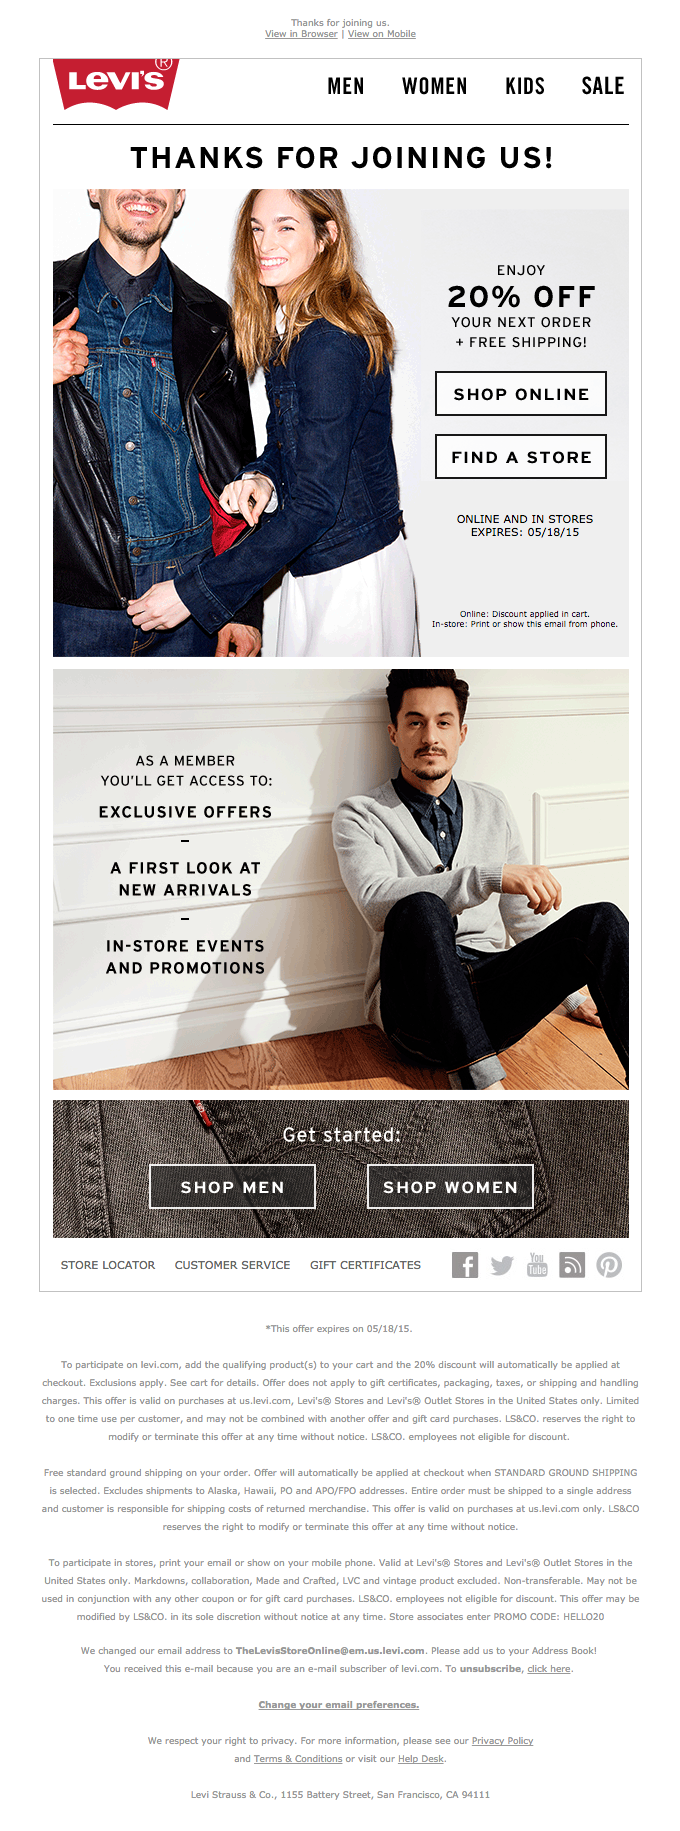 Welcome to the world of Levi's® - Desktop View | Really Good Emails